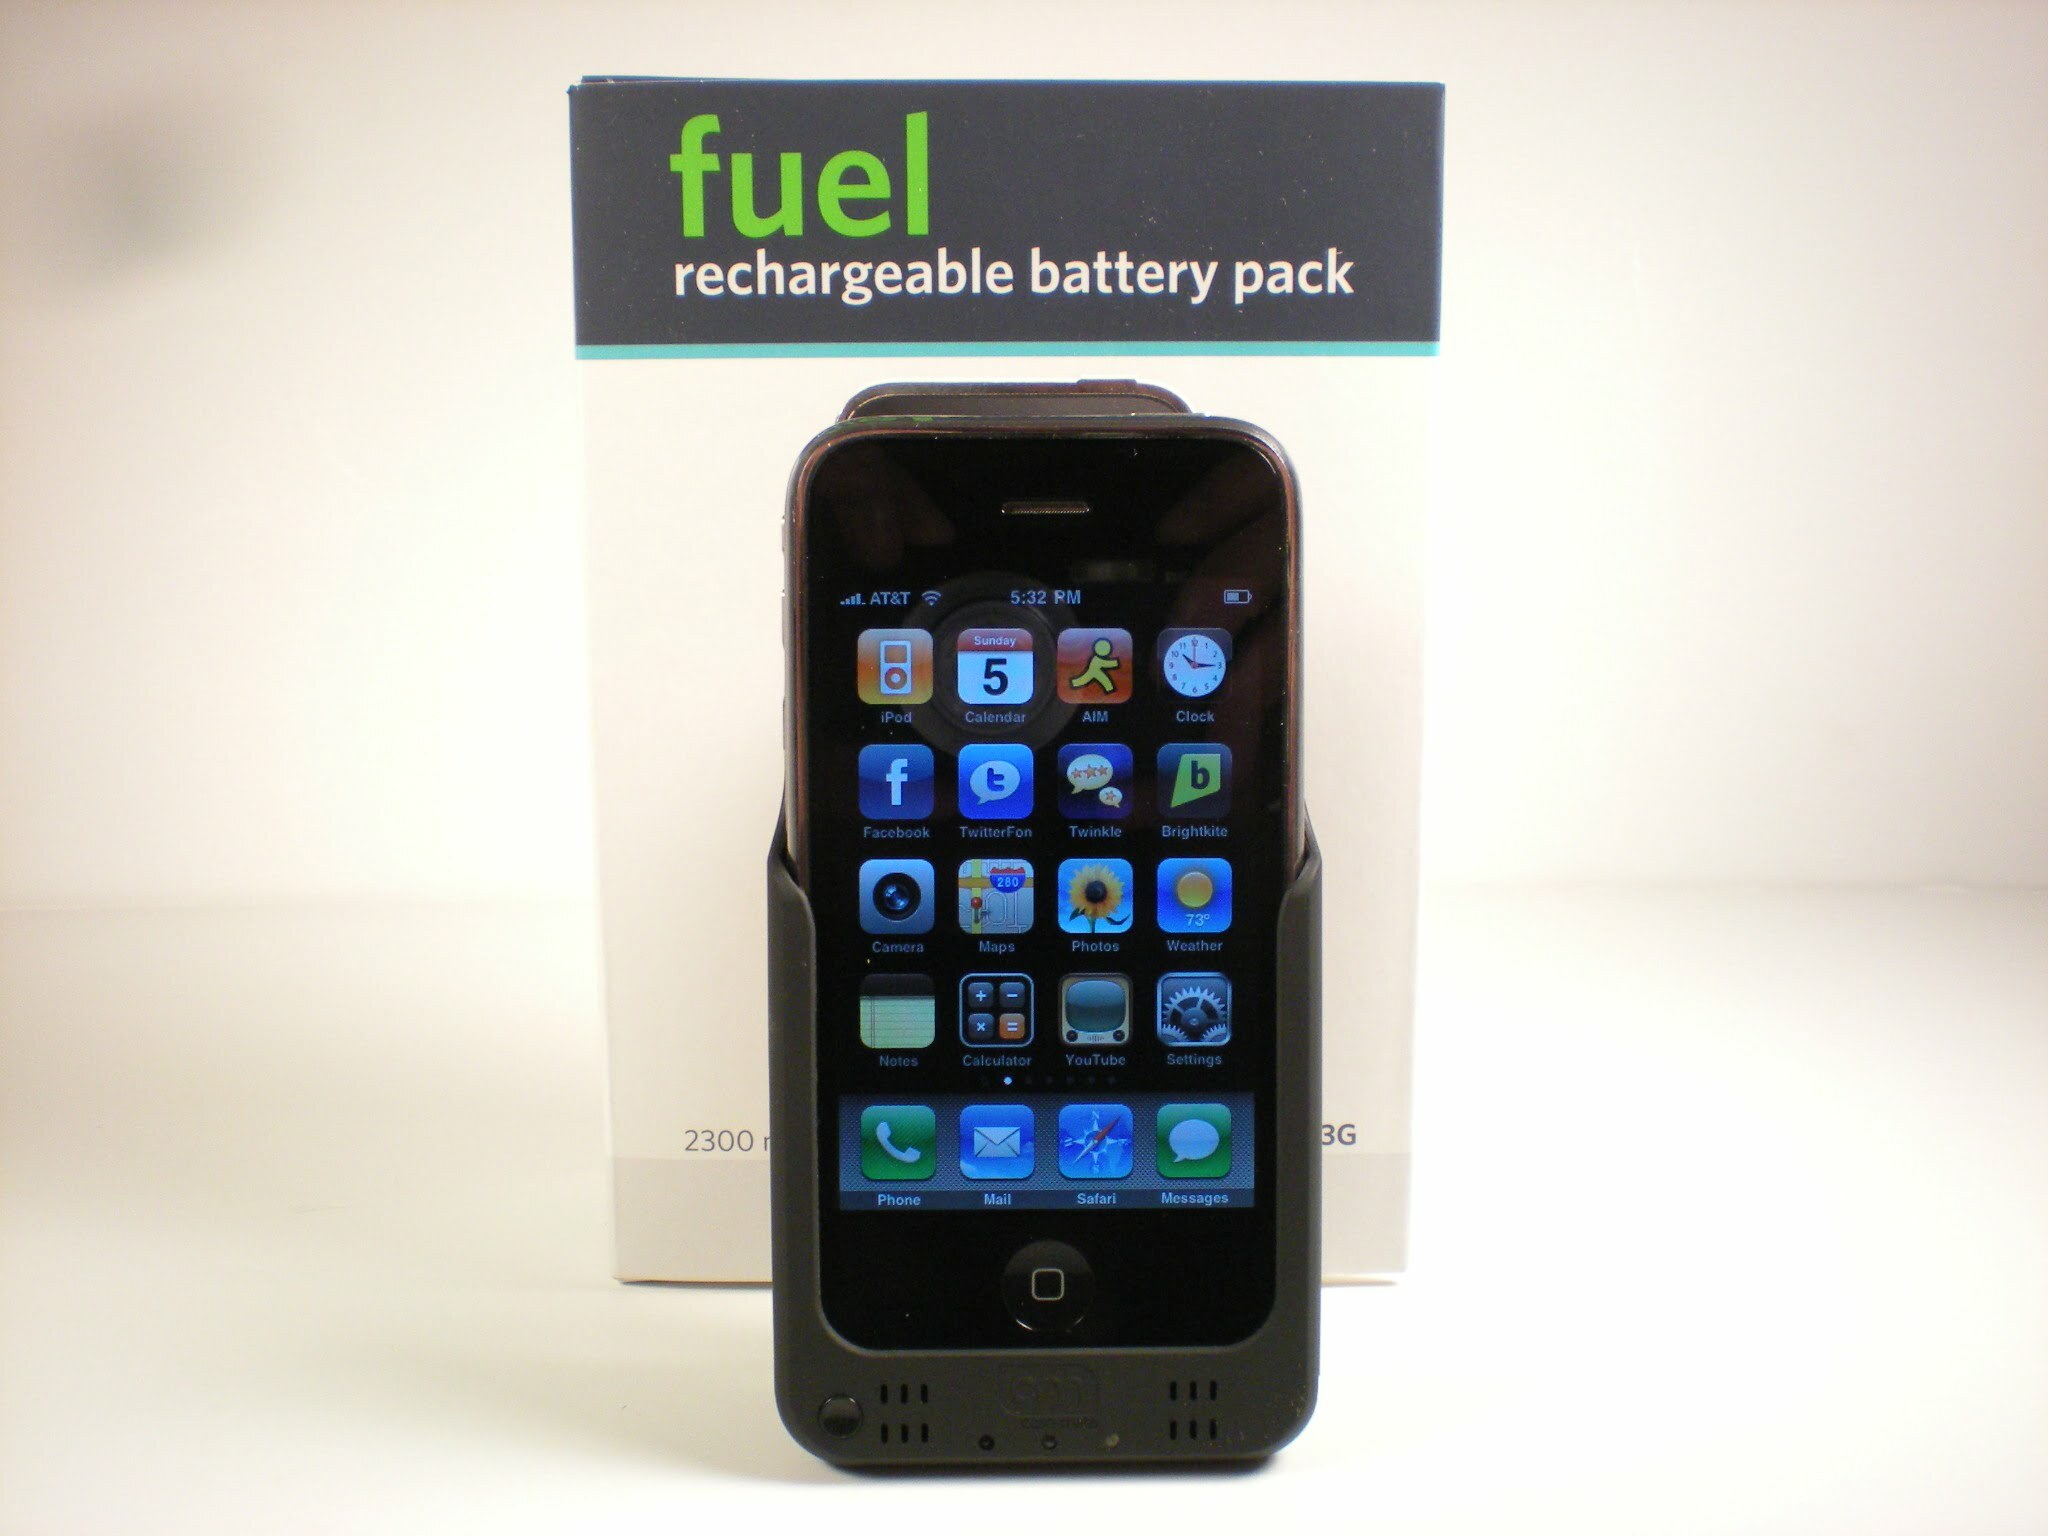 Case-Mate Fuel iPhone 3GS Battery Pack Review